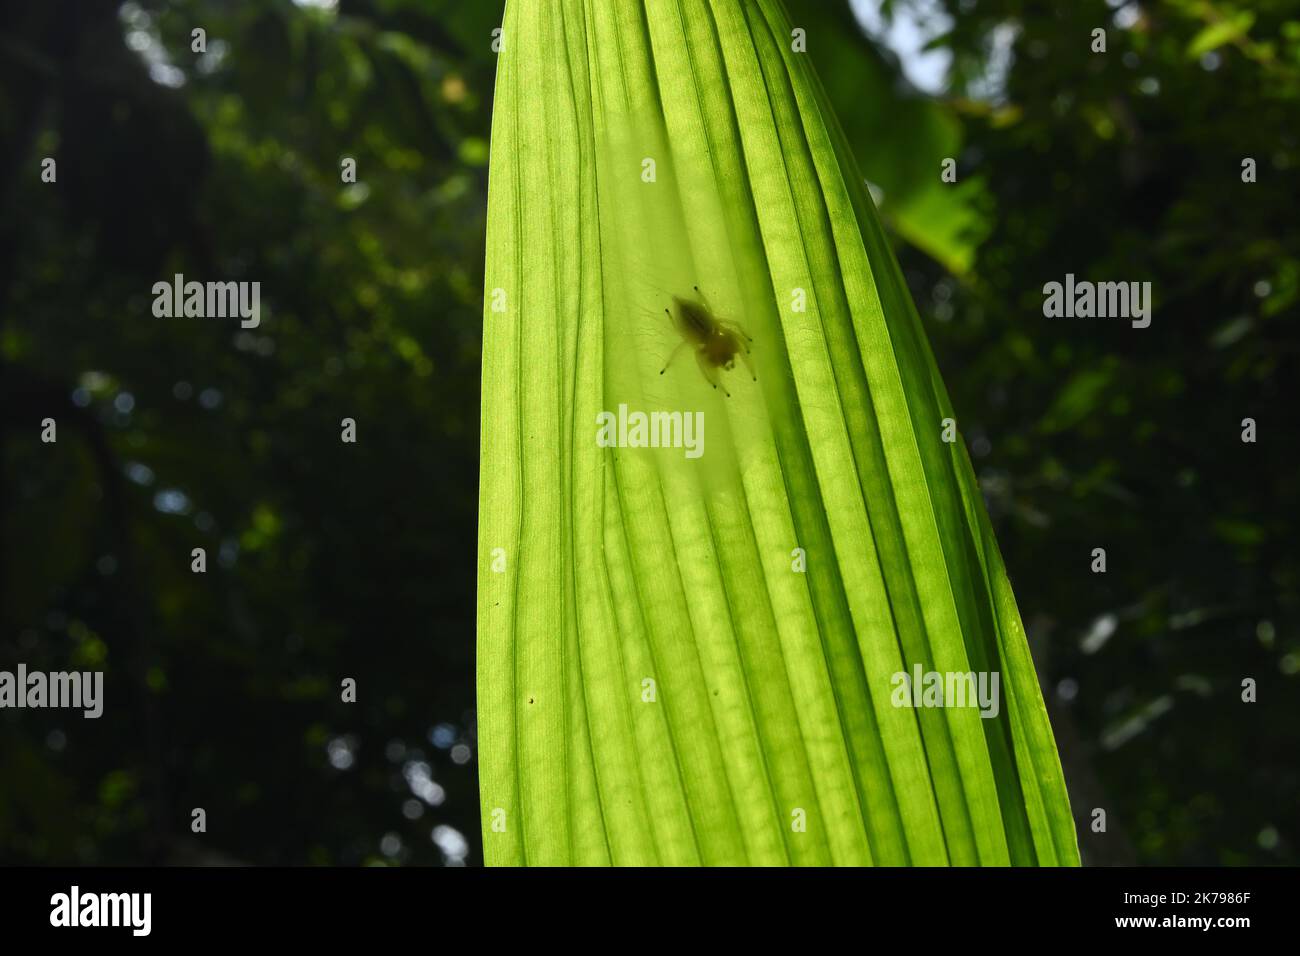 A small spider is on the thick silk spider web or nest located under a green Areca nut leaf in direct sunlight, the leaf underneath view Stock Photo